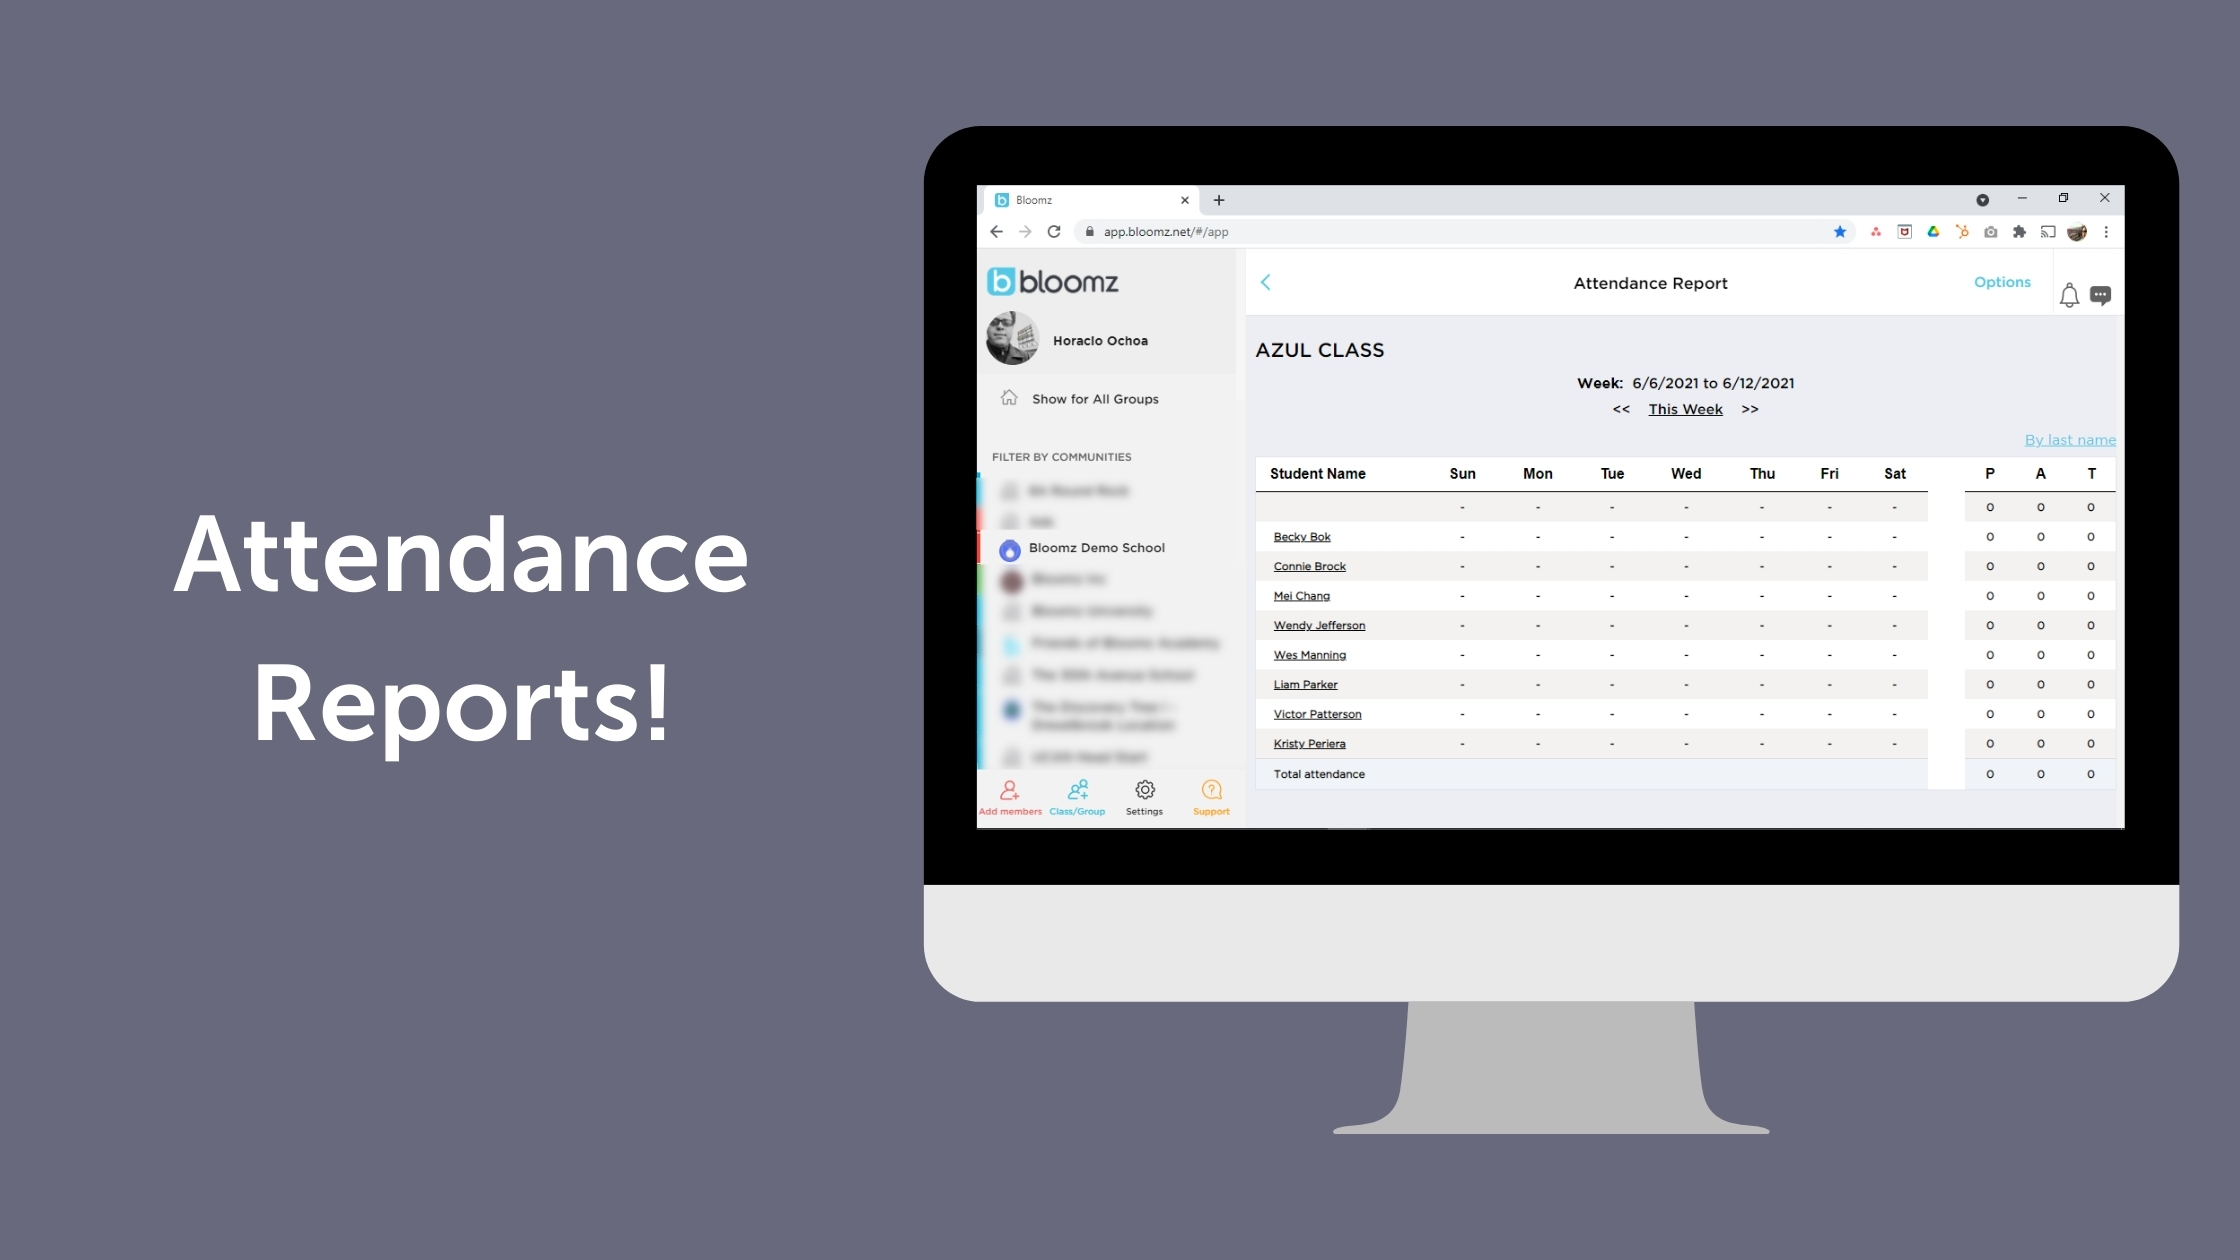 Attendance Reports are Here!